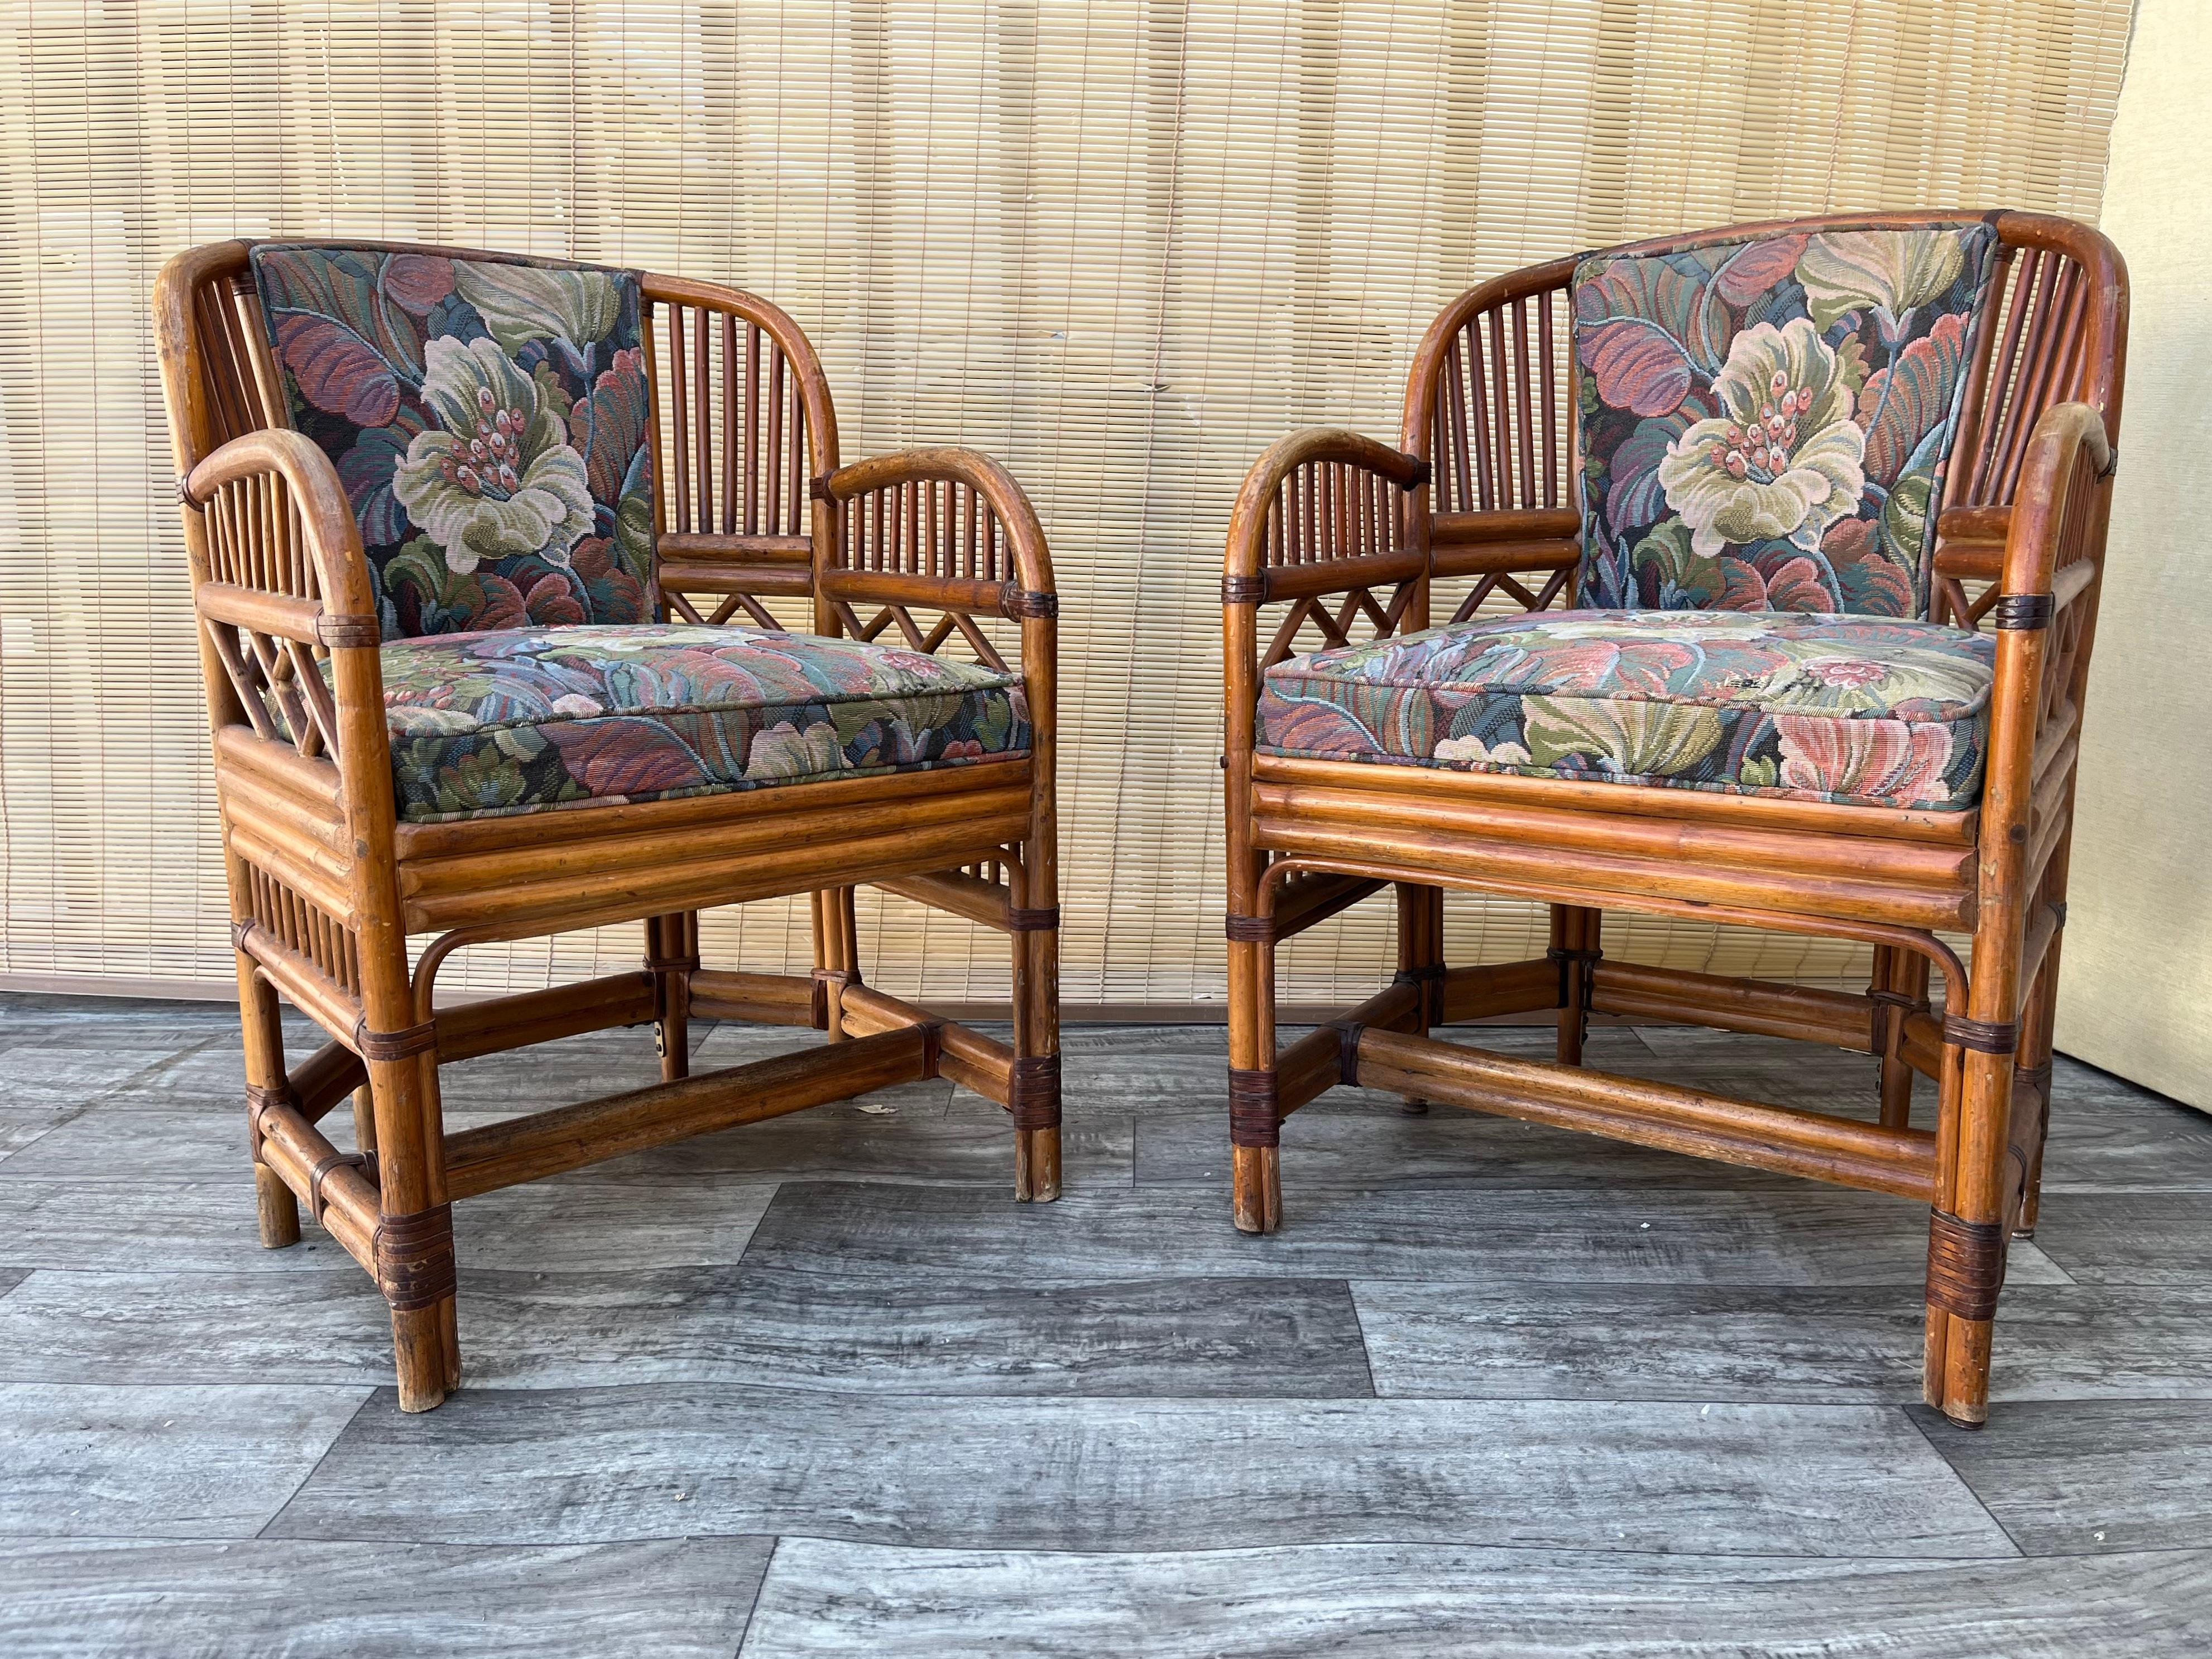 A Pair of Vintage Midcentury Chinoiserie Brighton Pavillion Style Upholstered Rattan Armchairs. Circa 1960s,
Features a rattan frame with leather straps and upholstered seat cushions and backrests.  In good original structurally sound and sturdy